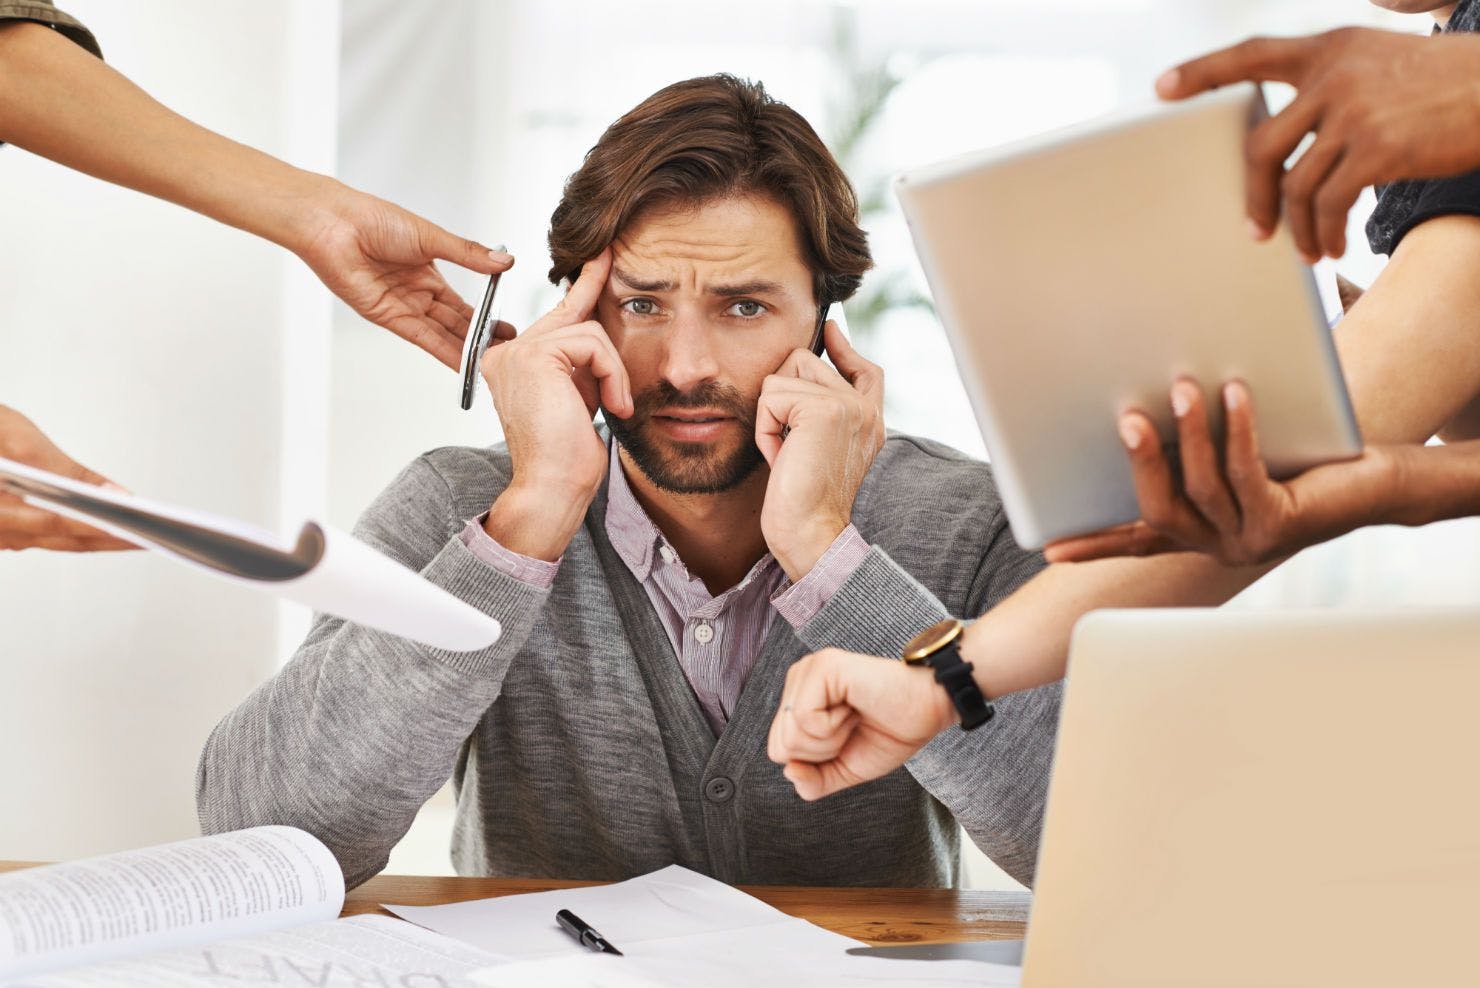 Manager Stress: Ways to Relieve Stress as a Manager